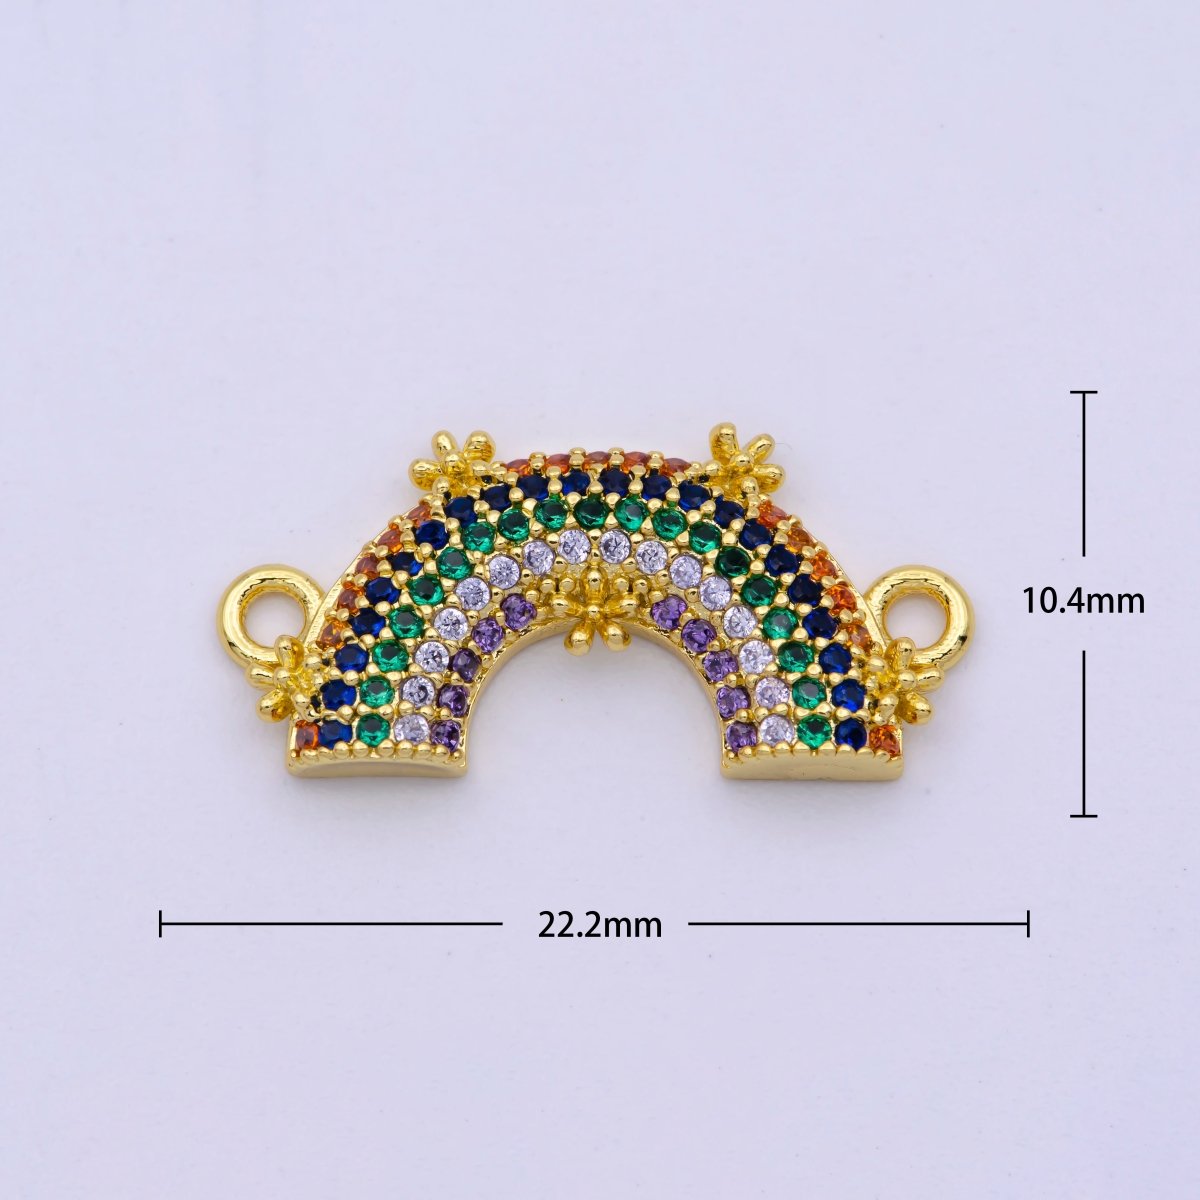 Dainty 24K Gold Filled Colorful Cz Gold Rainbow Charm Connector for Necklace Component N-067 - DLUXCA